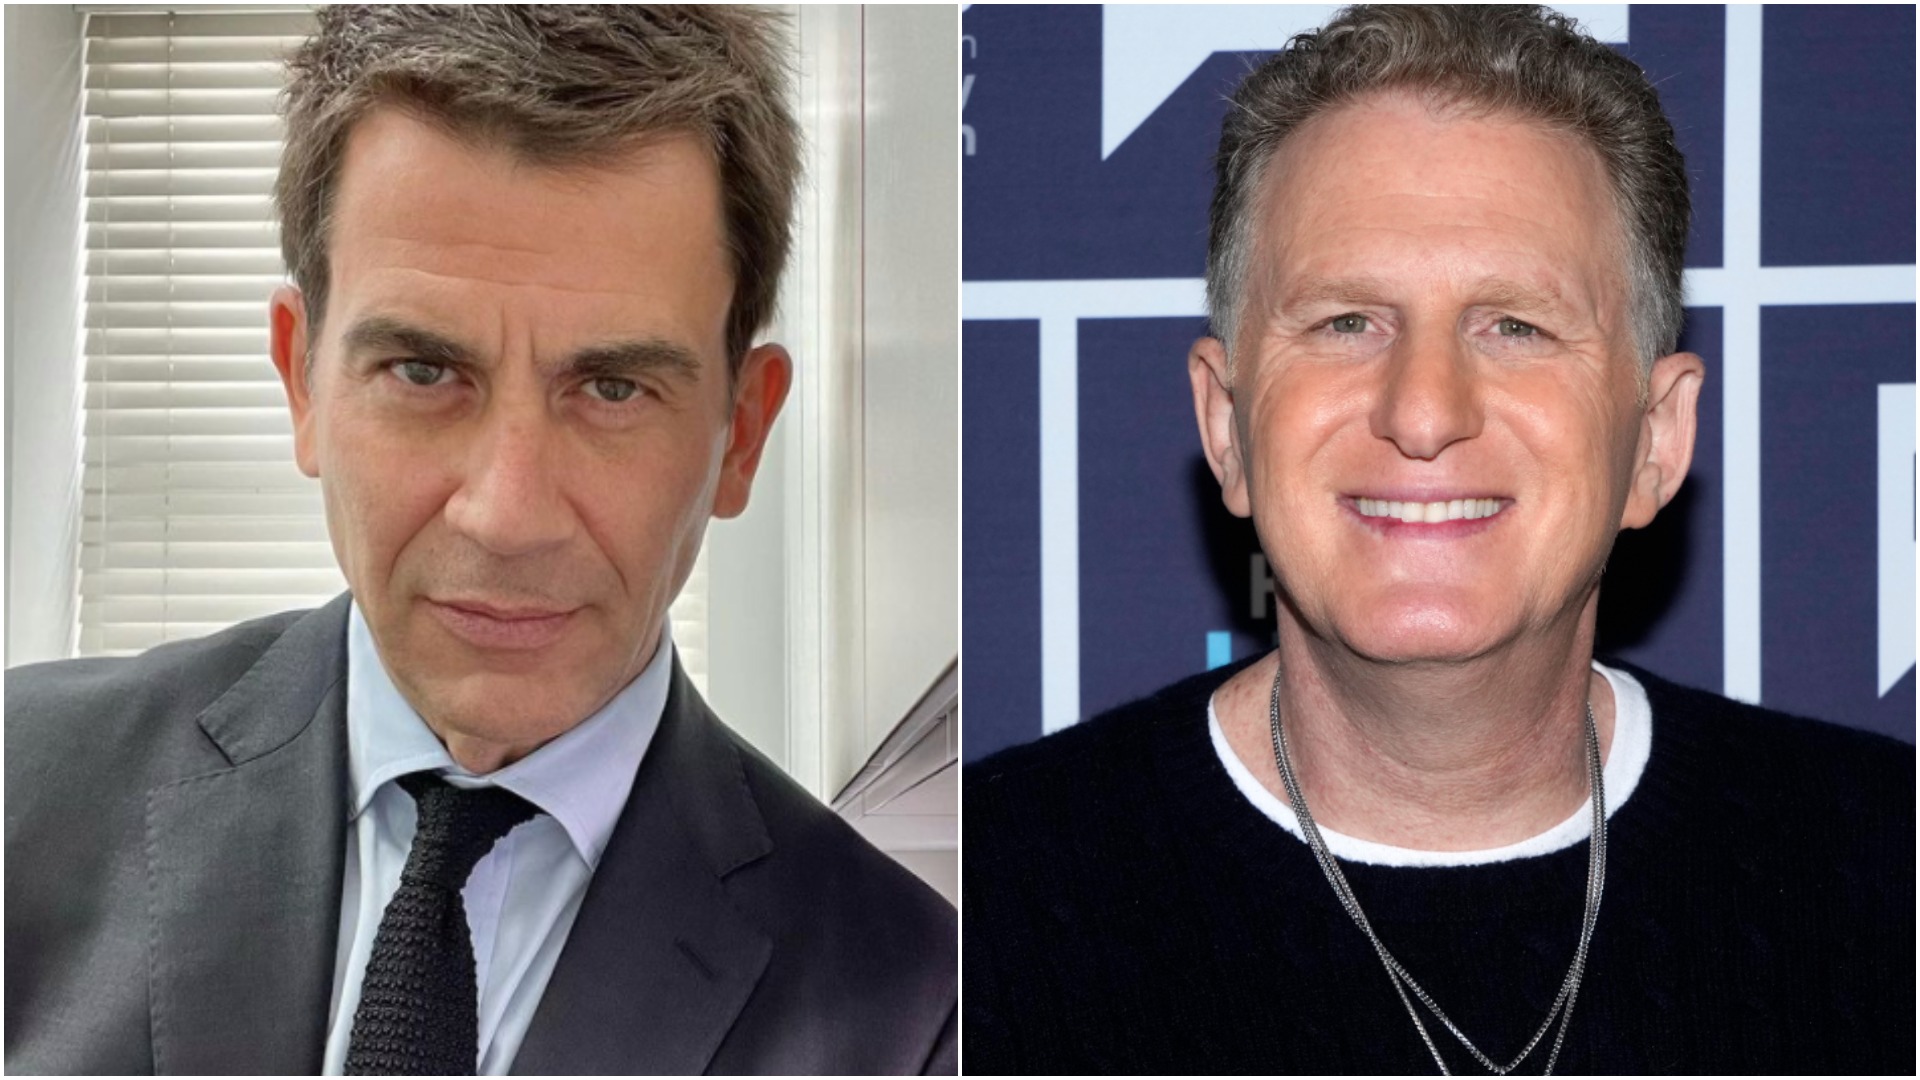 George Hahn marks 20 years sober in a photo. Michael Rapaport smiles at Bravo's 'WWHL'